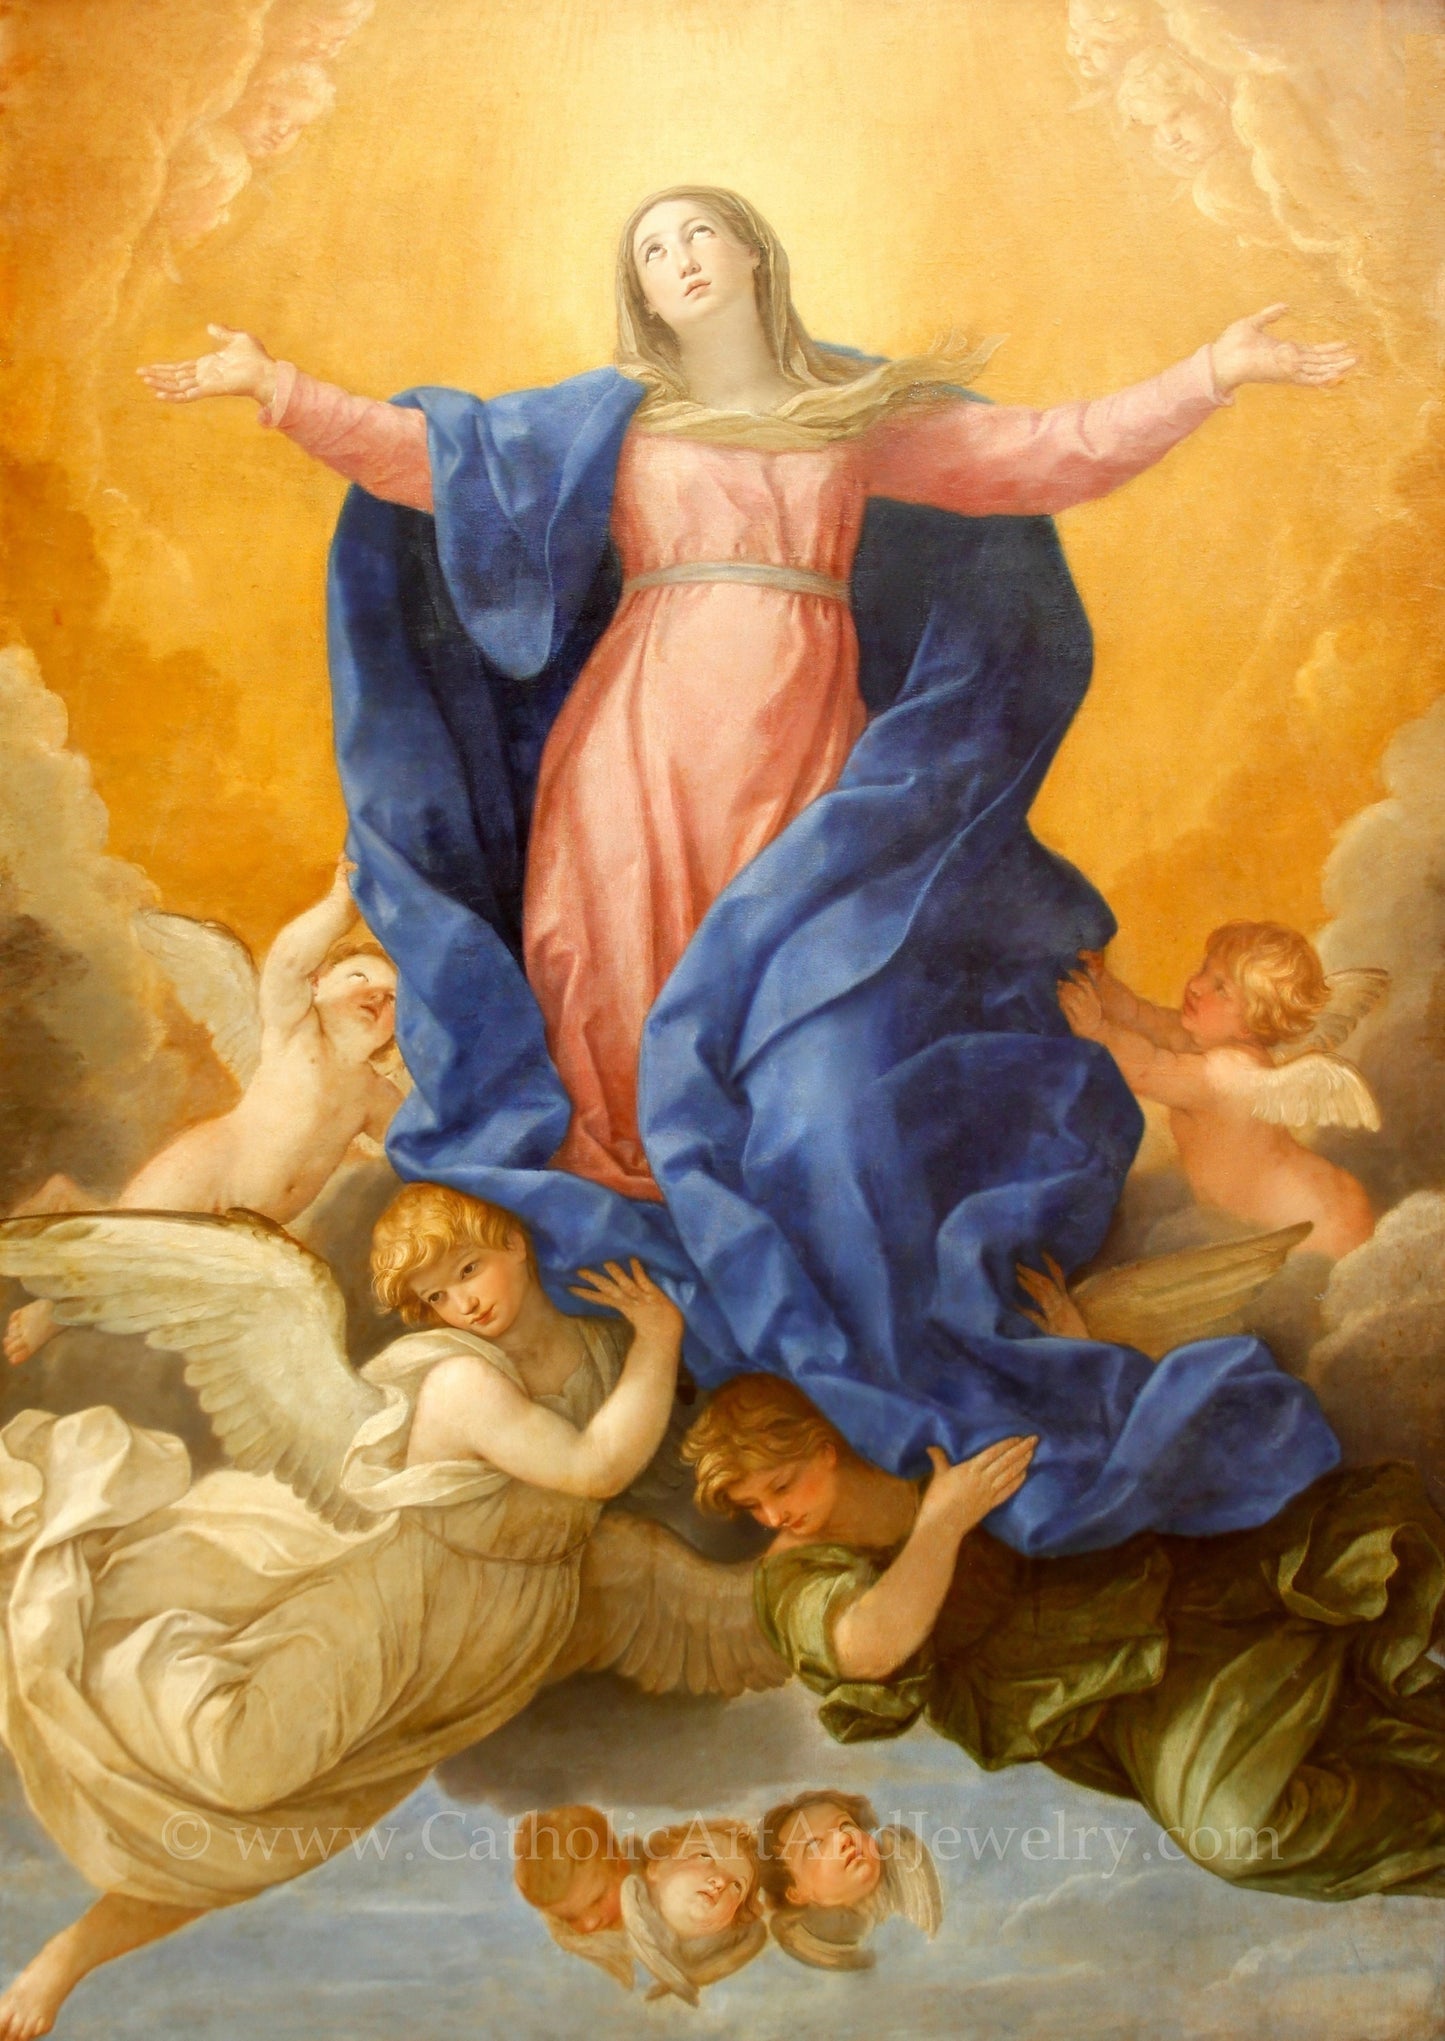 New! The Assumption –7 Sizes – by Guido Reni – Catholic Art wrok – Archival Quality